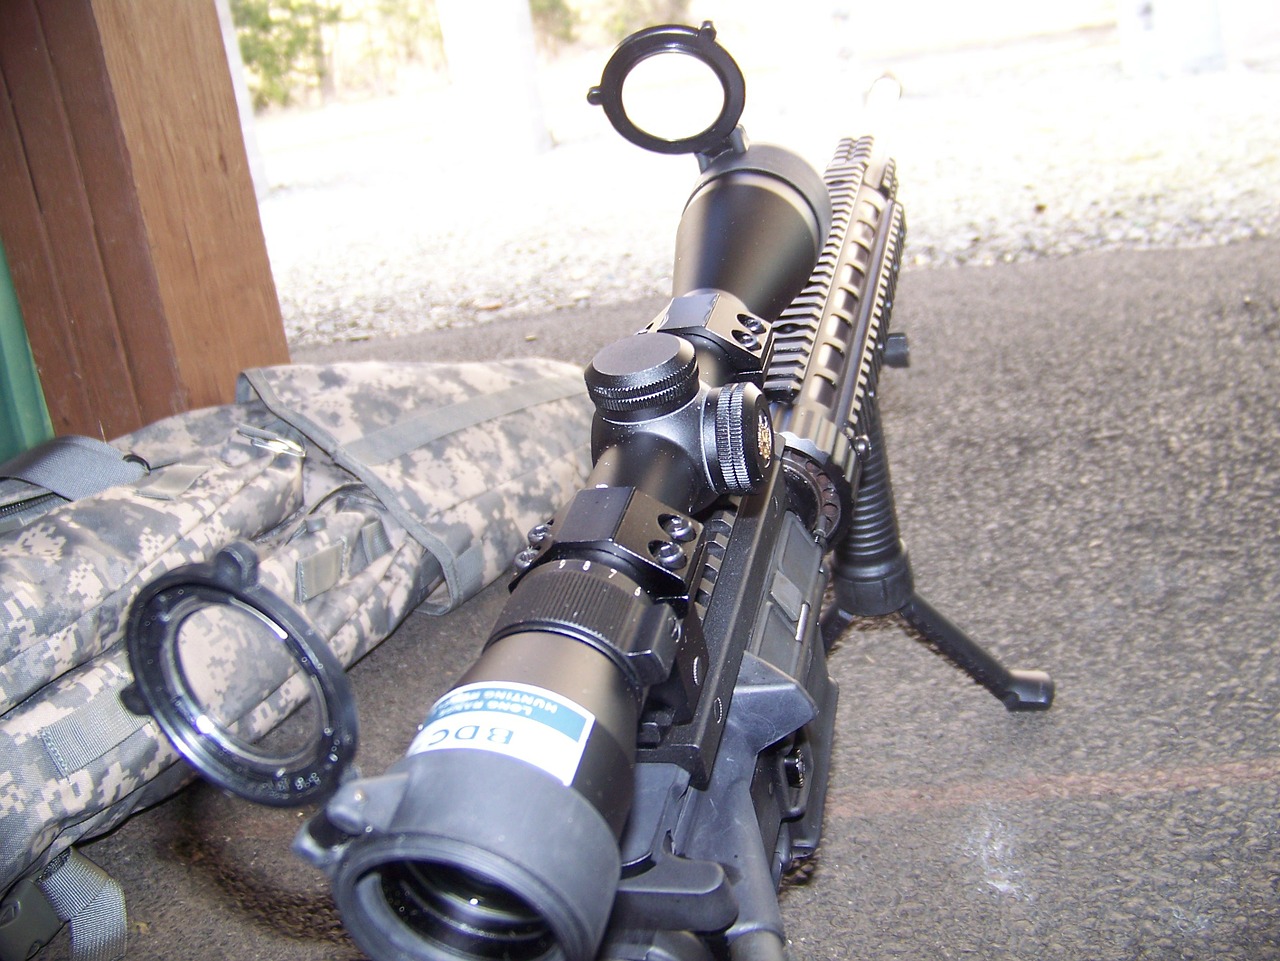 close-up photo of a scope attached to a rifle